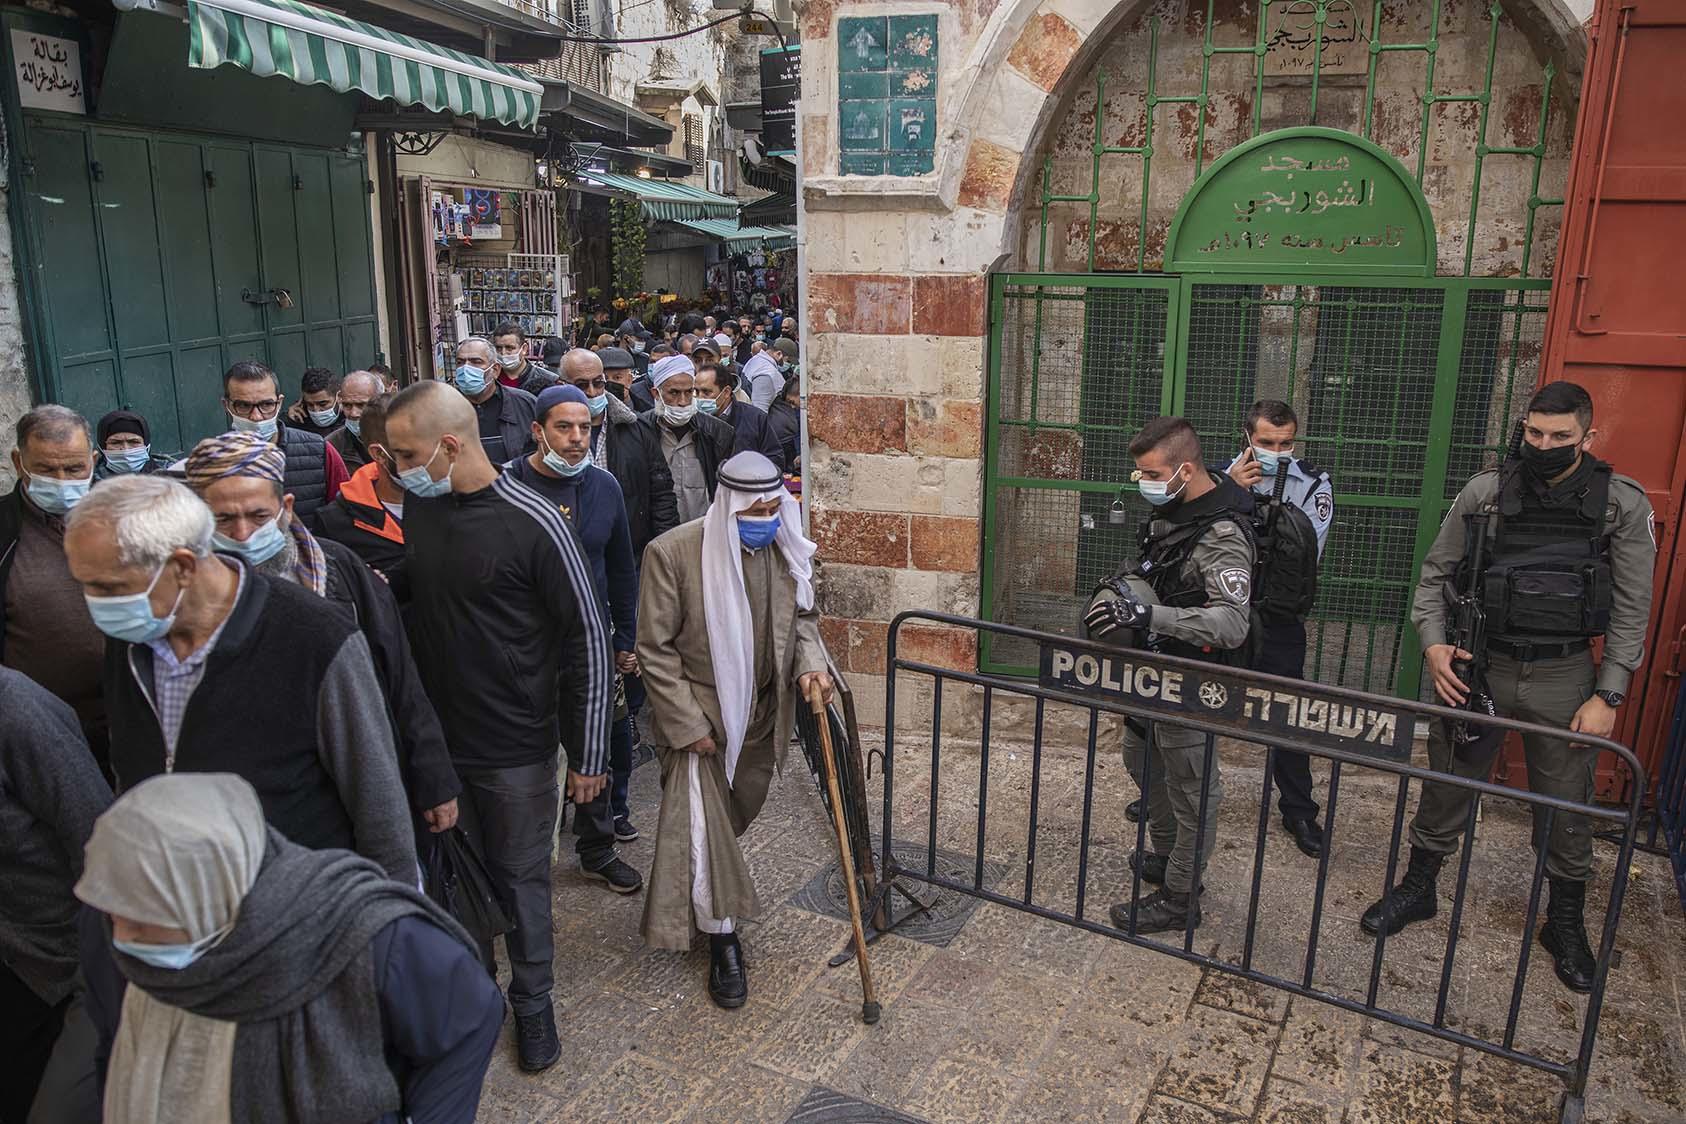 Israeli police stand at their post as Palestinians leave the Dome of the Rock Mosque after Friday prayers in the Old City of Jerusalem on Friday, Nov. 27, 2020. (Dan Balilty/The New York Times)